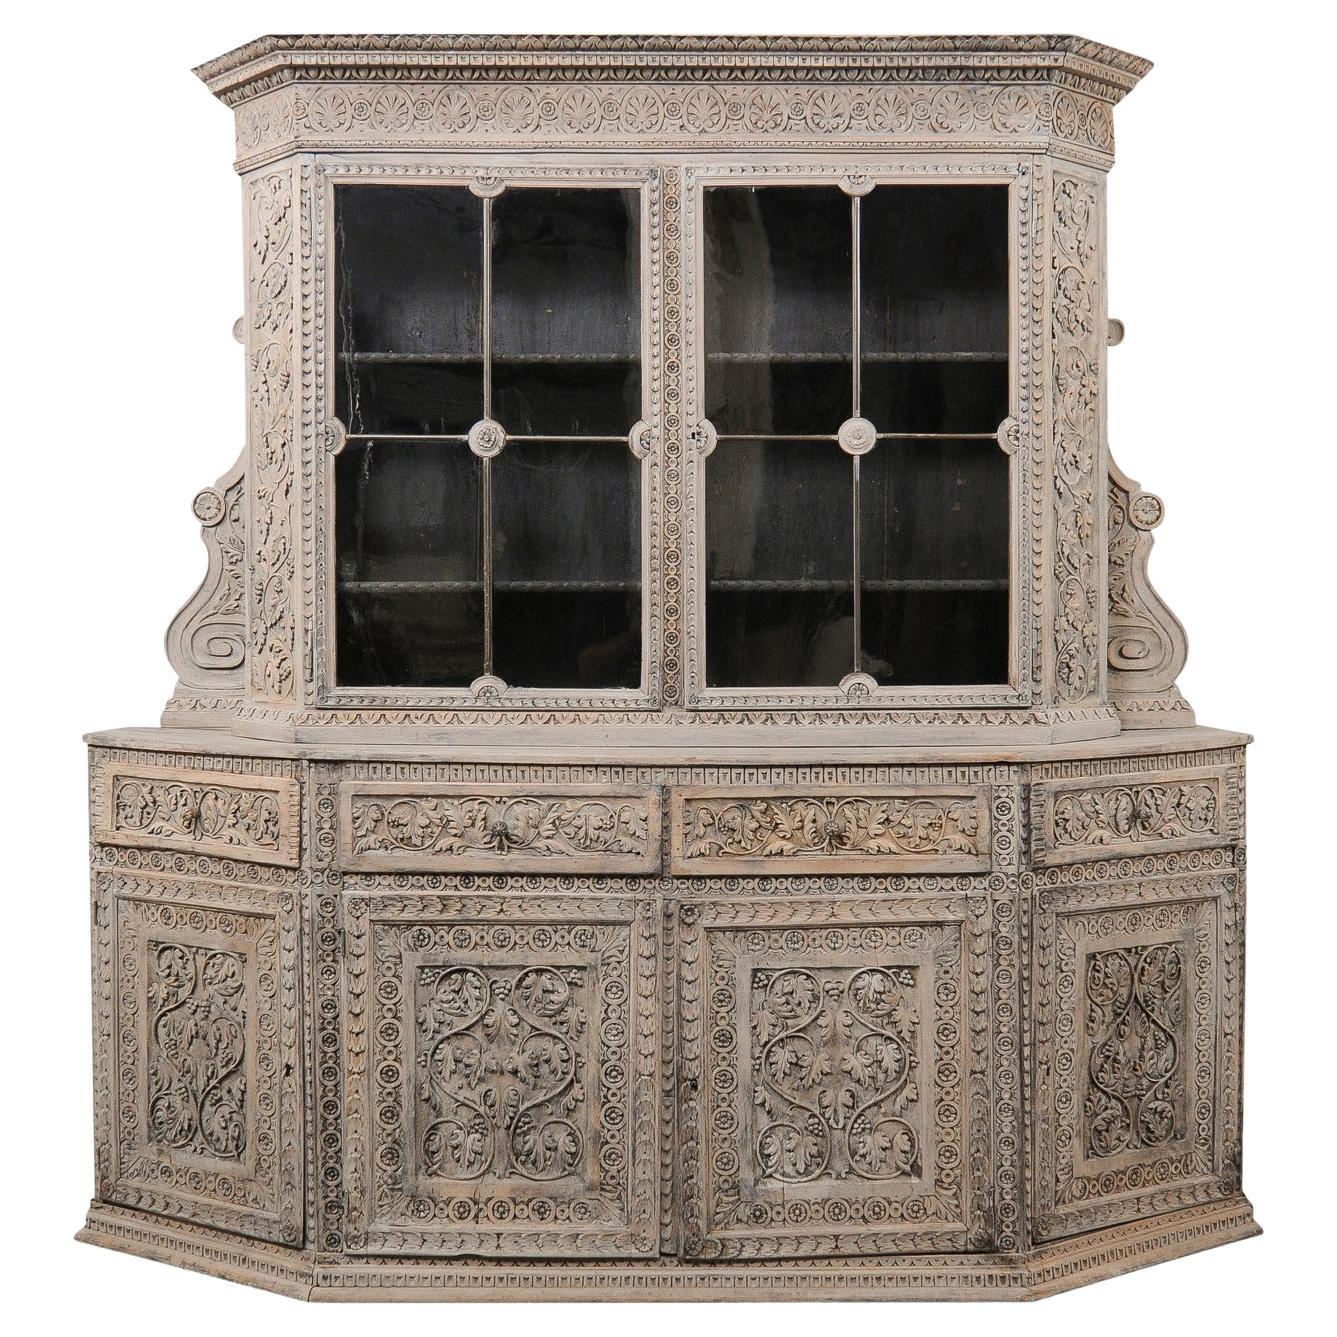 Large 18th C. Italian Wood Cabinet w/Upper Glass Display, Fabulously Carved!